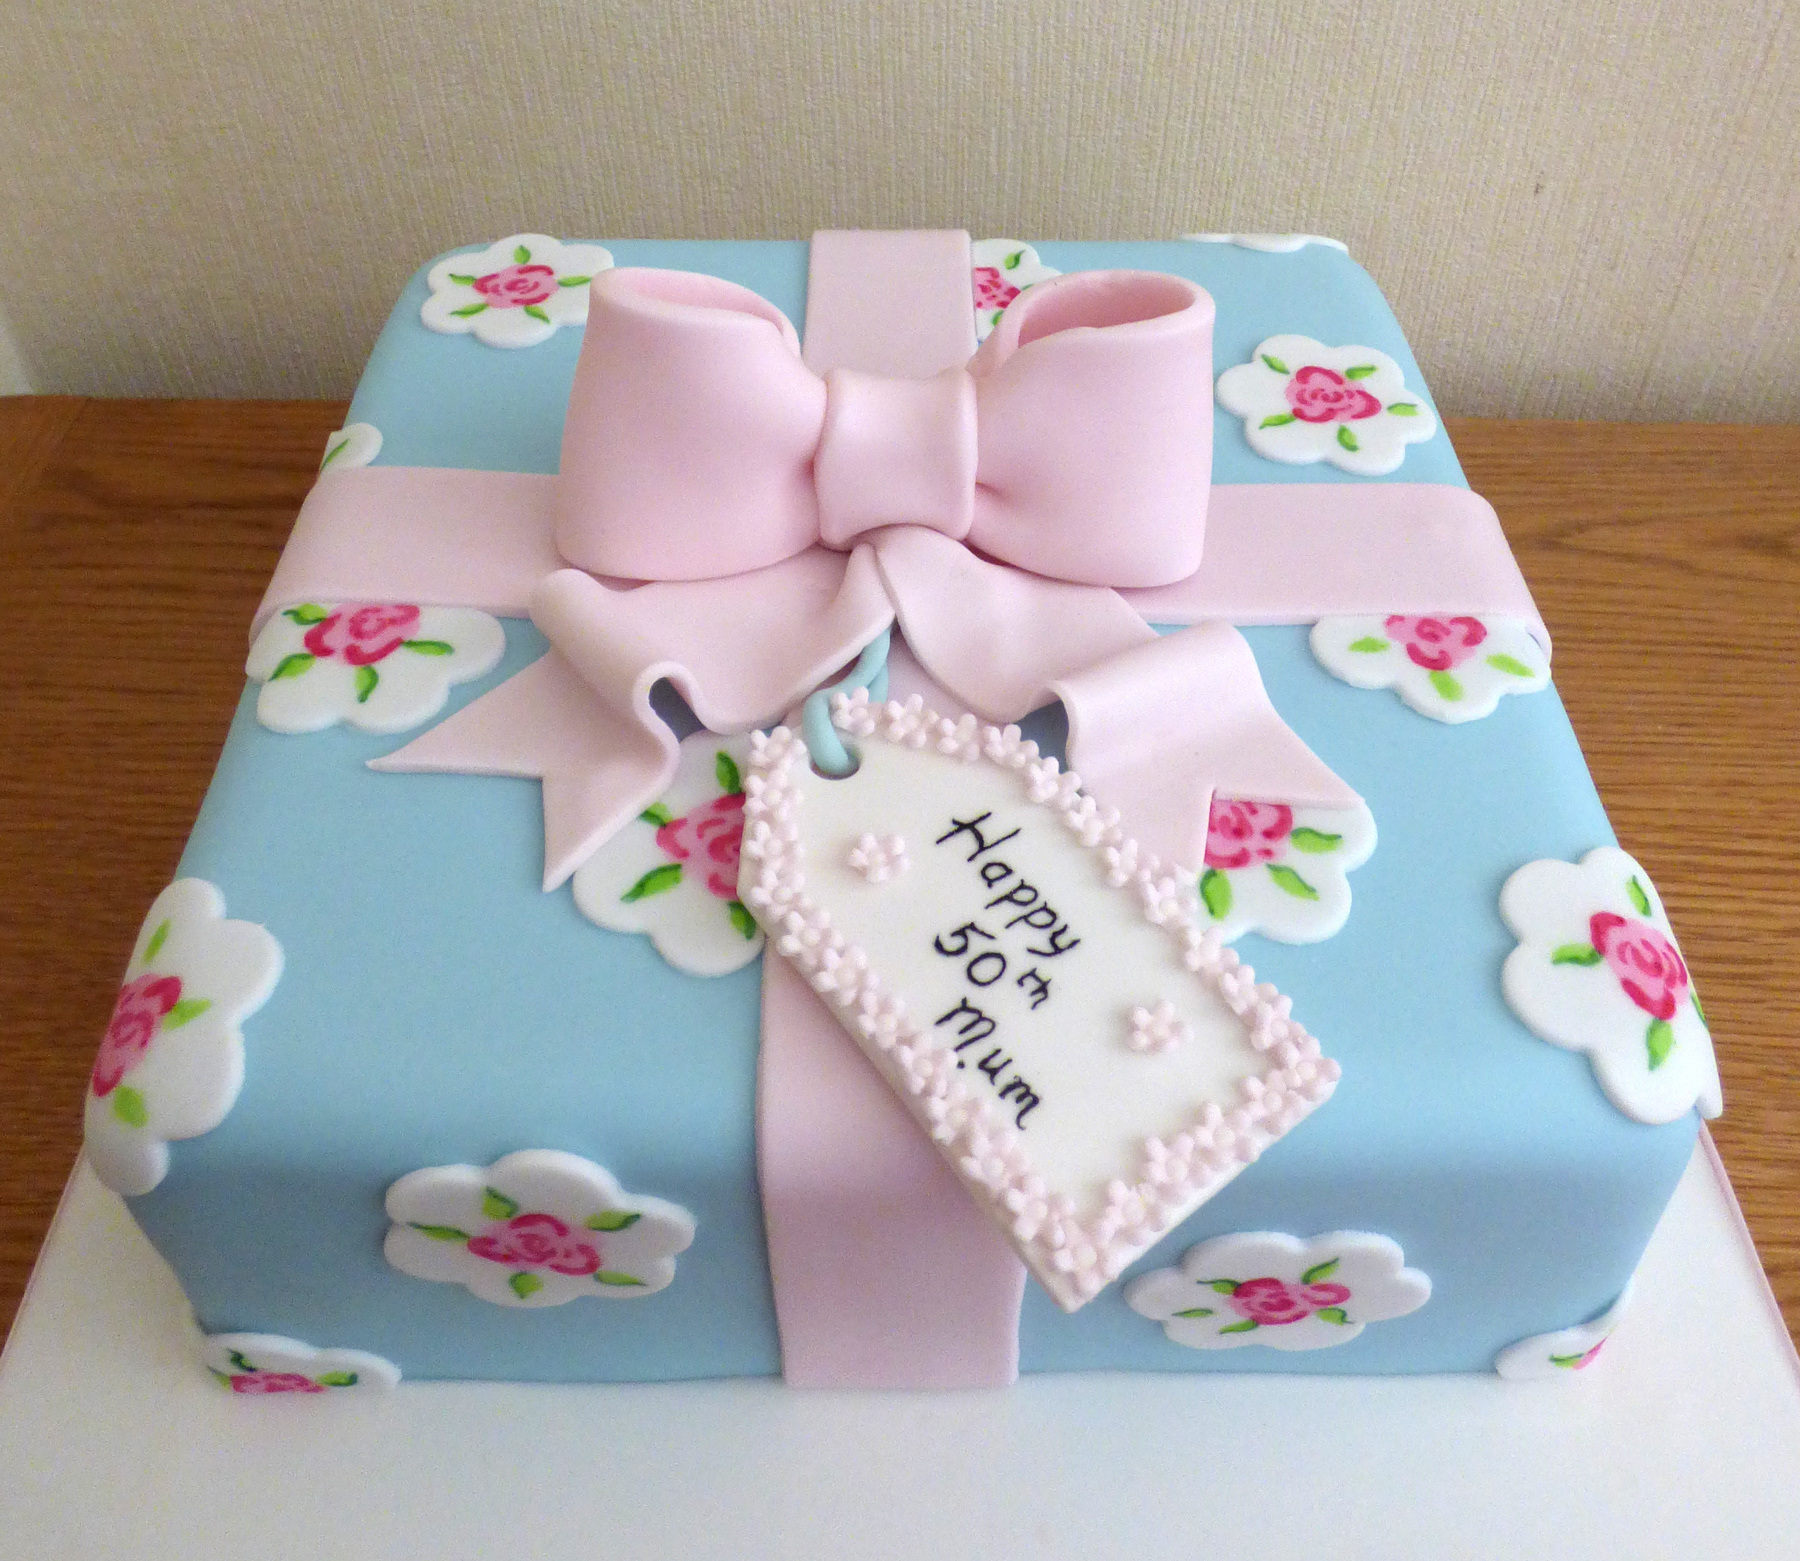 Christmas cakes and gifts